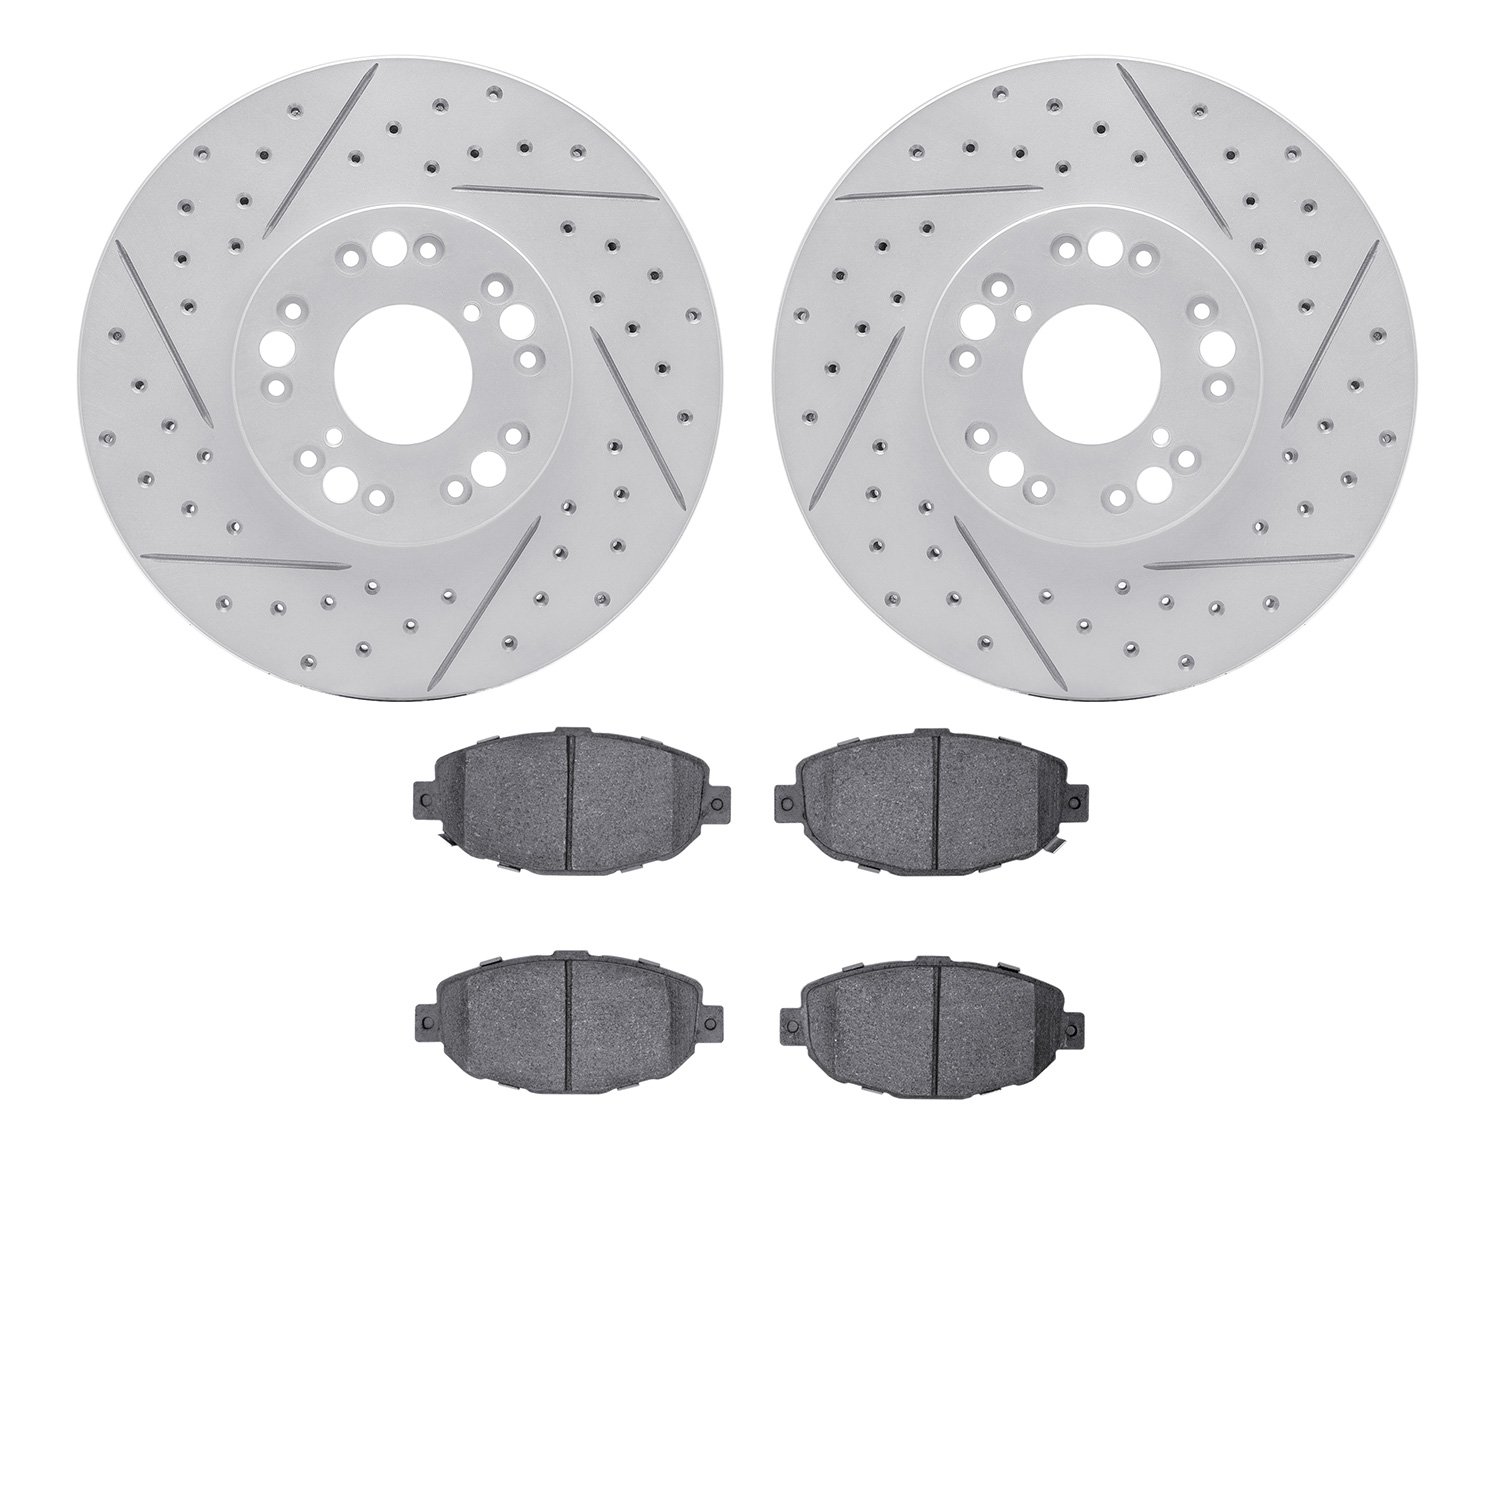 2502-75000 Geoperformance Drilled/Slotted Rotors w/5000 Advanced Brake Pads Kit, 1992-2000 Lexus/Toyota/Scion, Position: Front